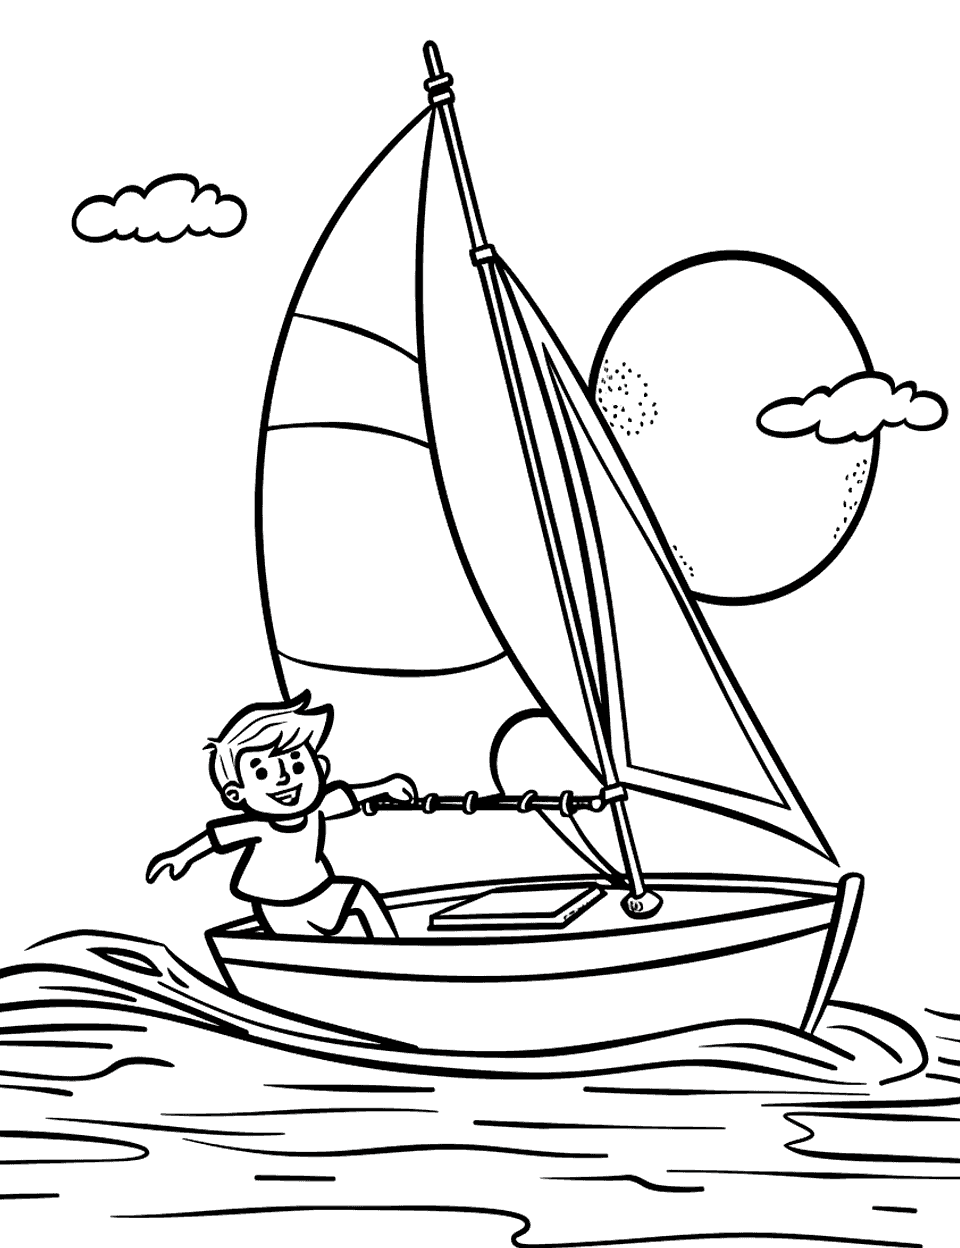 Sailing Into the Sea Sports Coloring Page - A small sailboat with a simple sail, moving on calm waters.